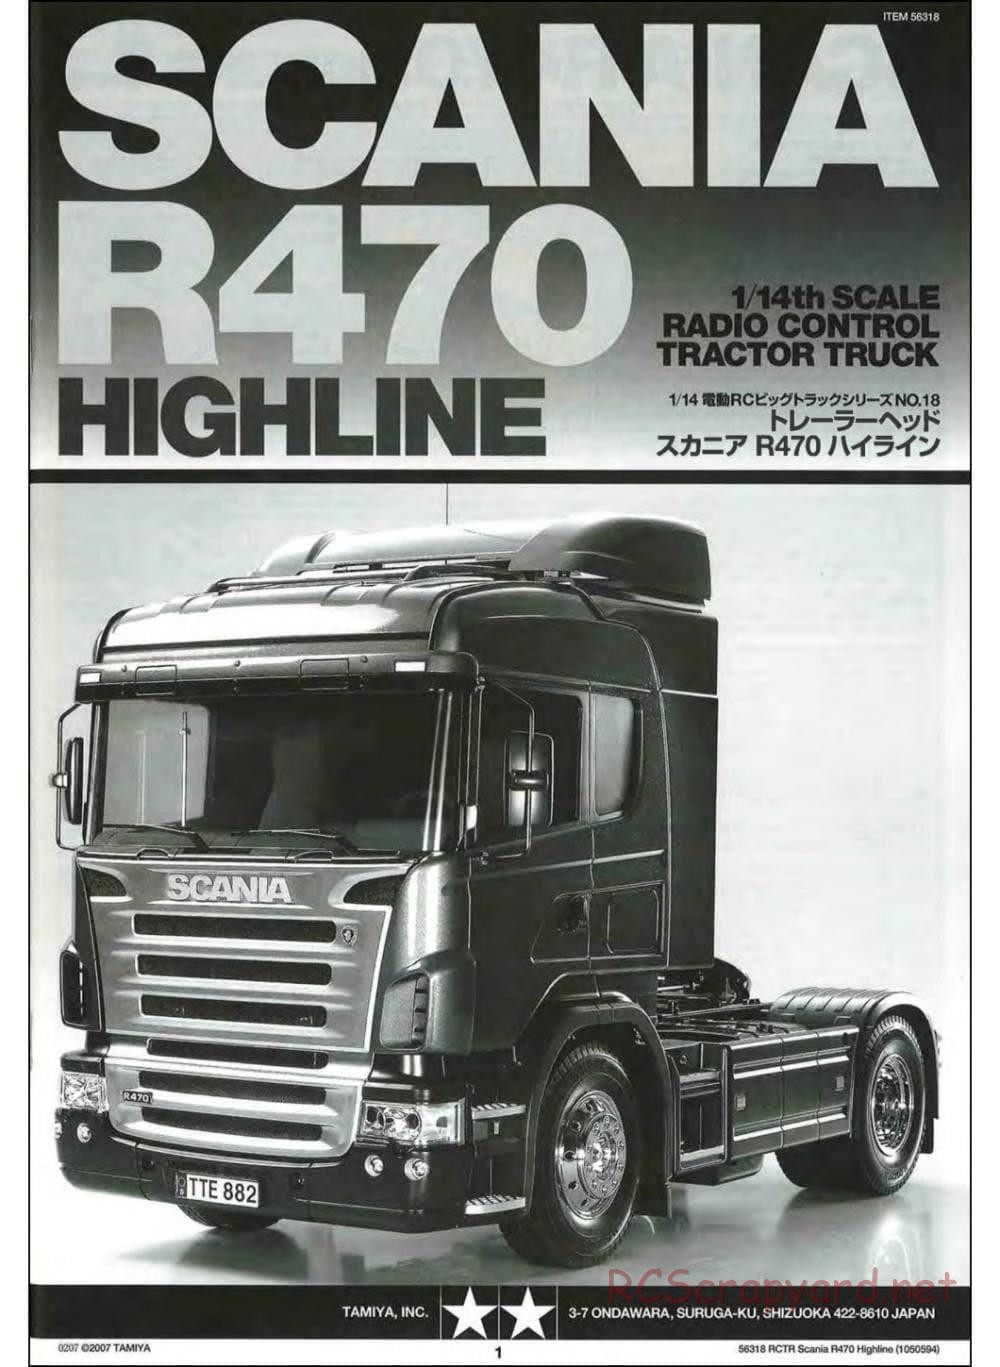 Tamiya - Scania R470 Highline Tractor Truck Chassis - Manual - Page 1